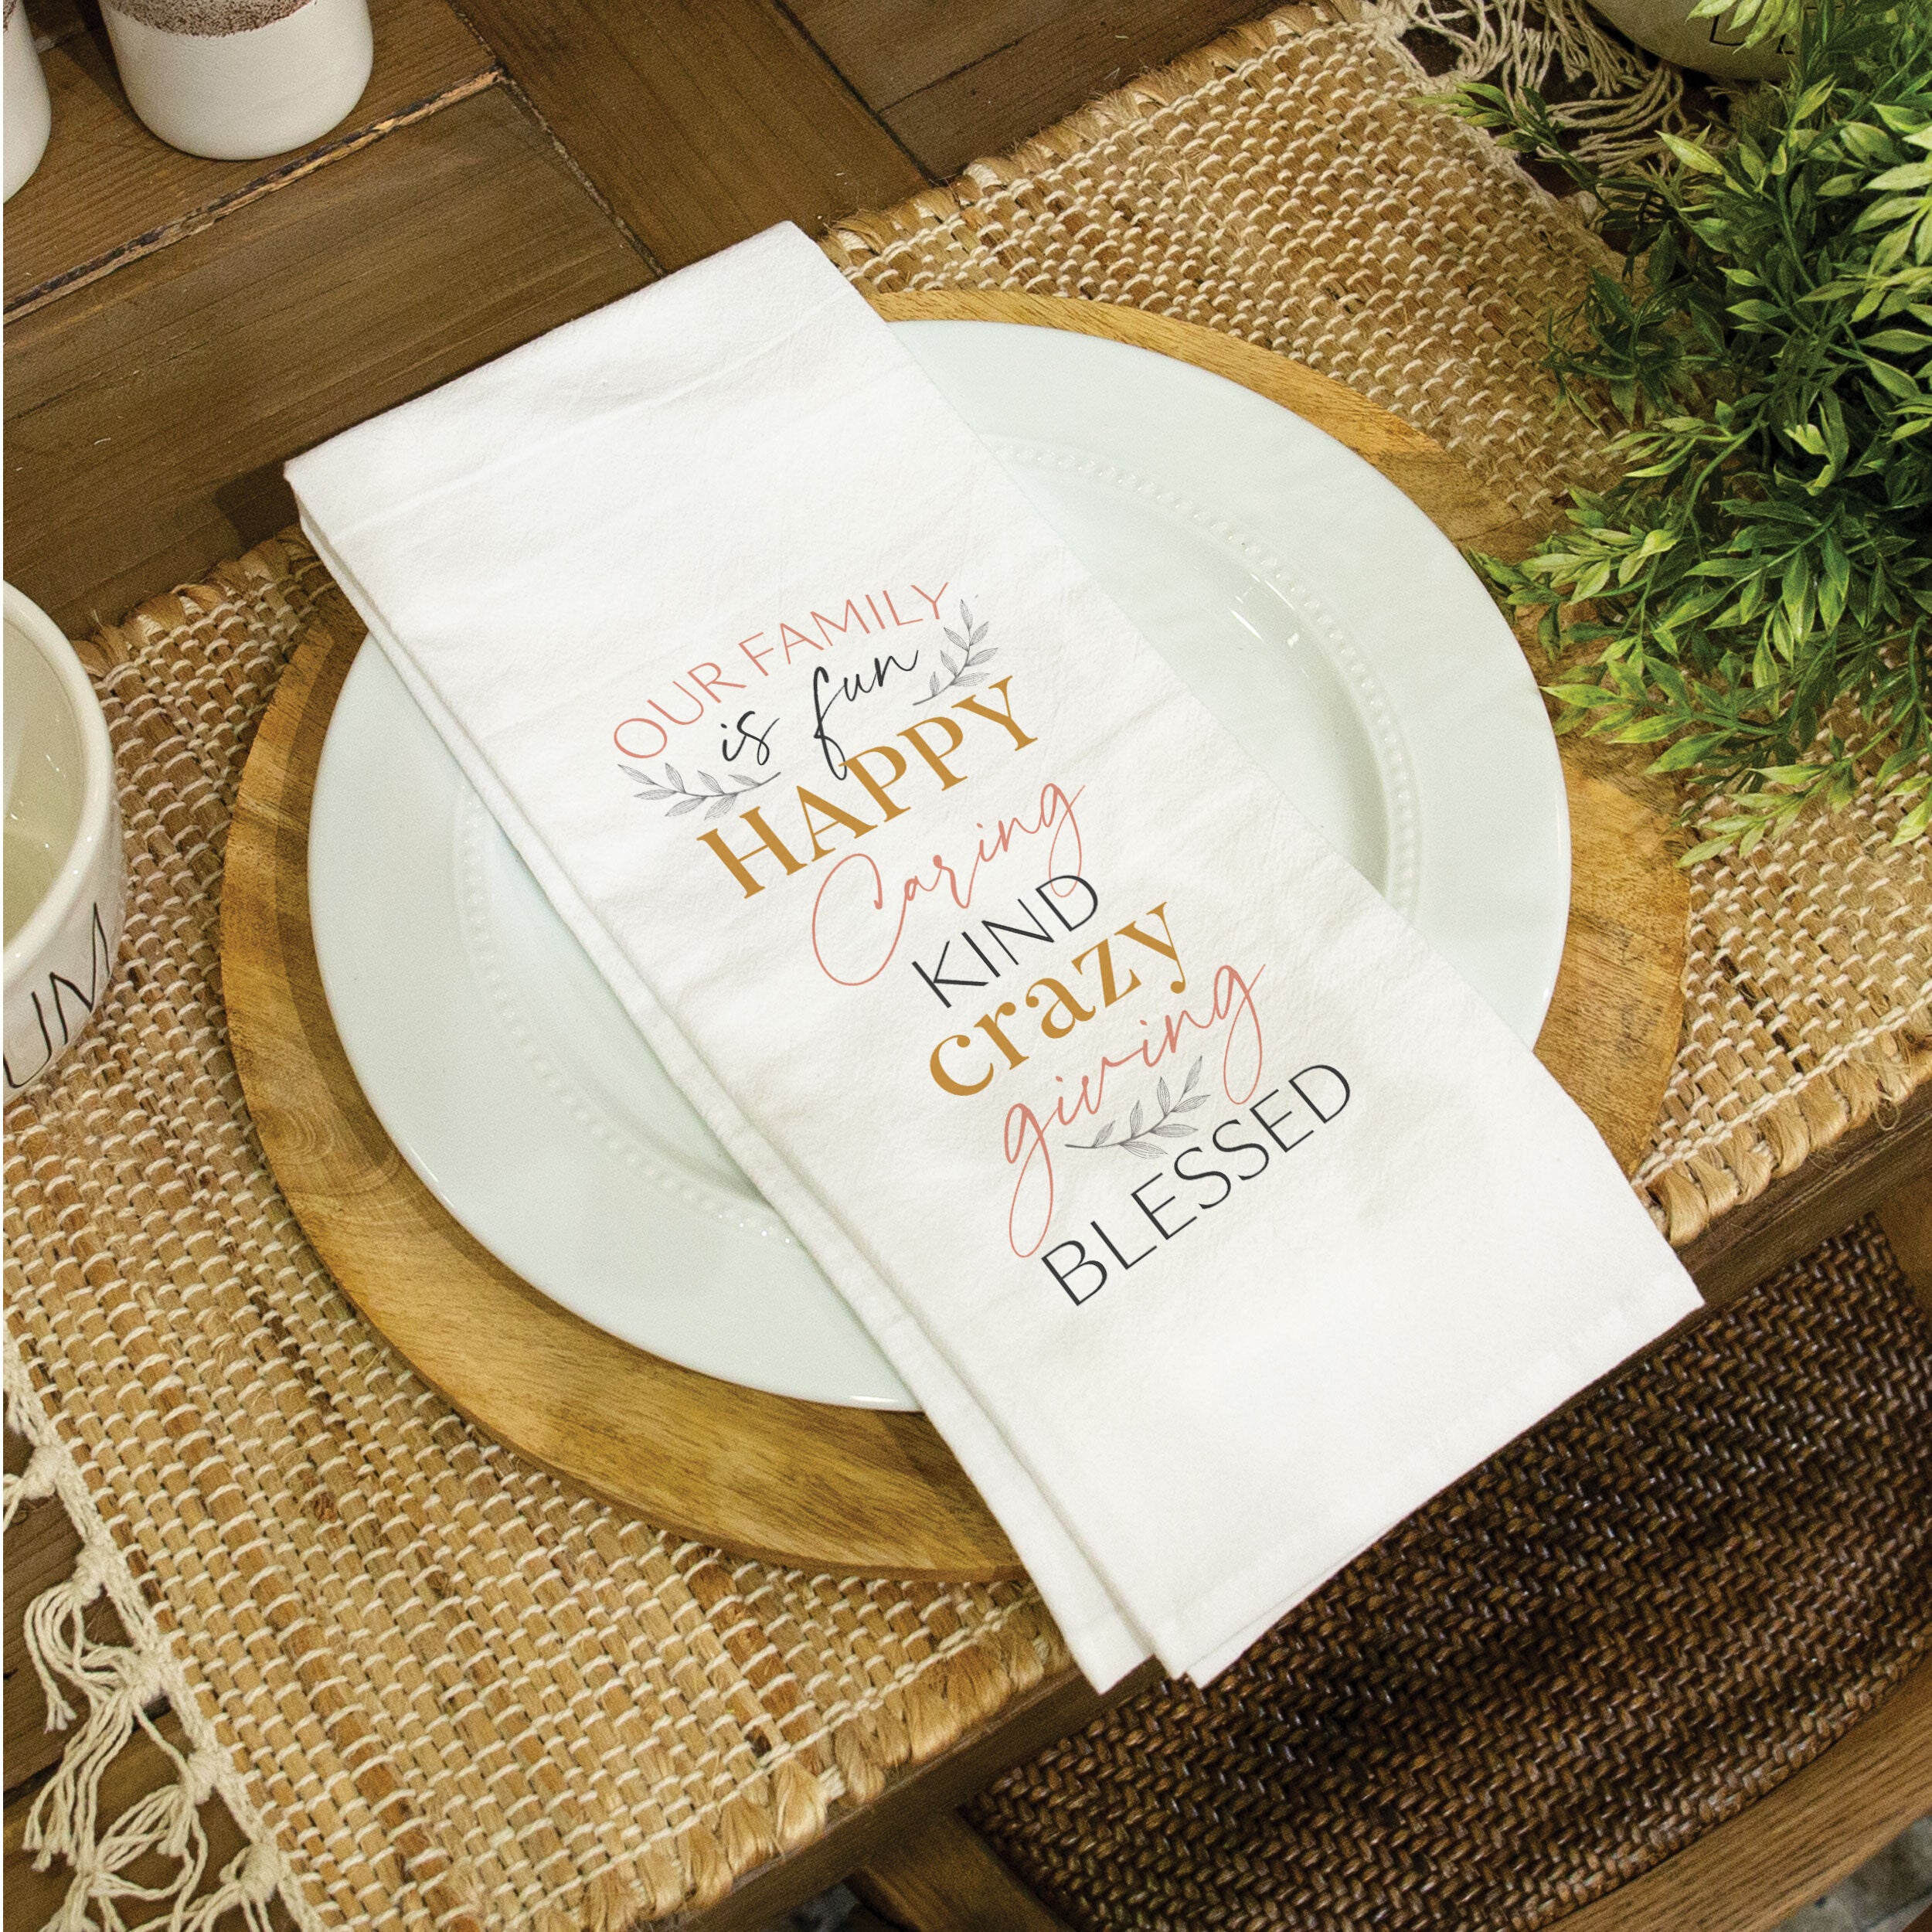 **Our Family Is Fun Happy Caring Kind Crazy Giving Blessed Tea Towel